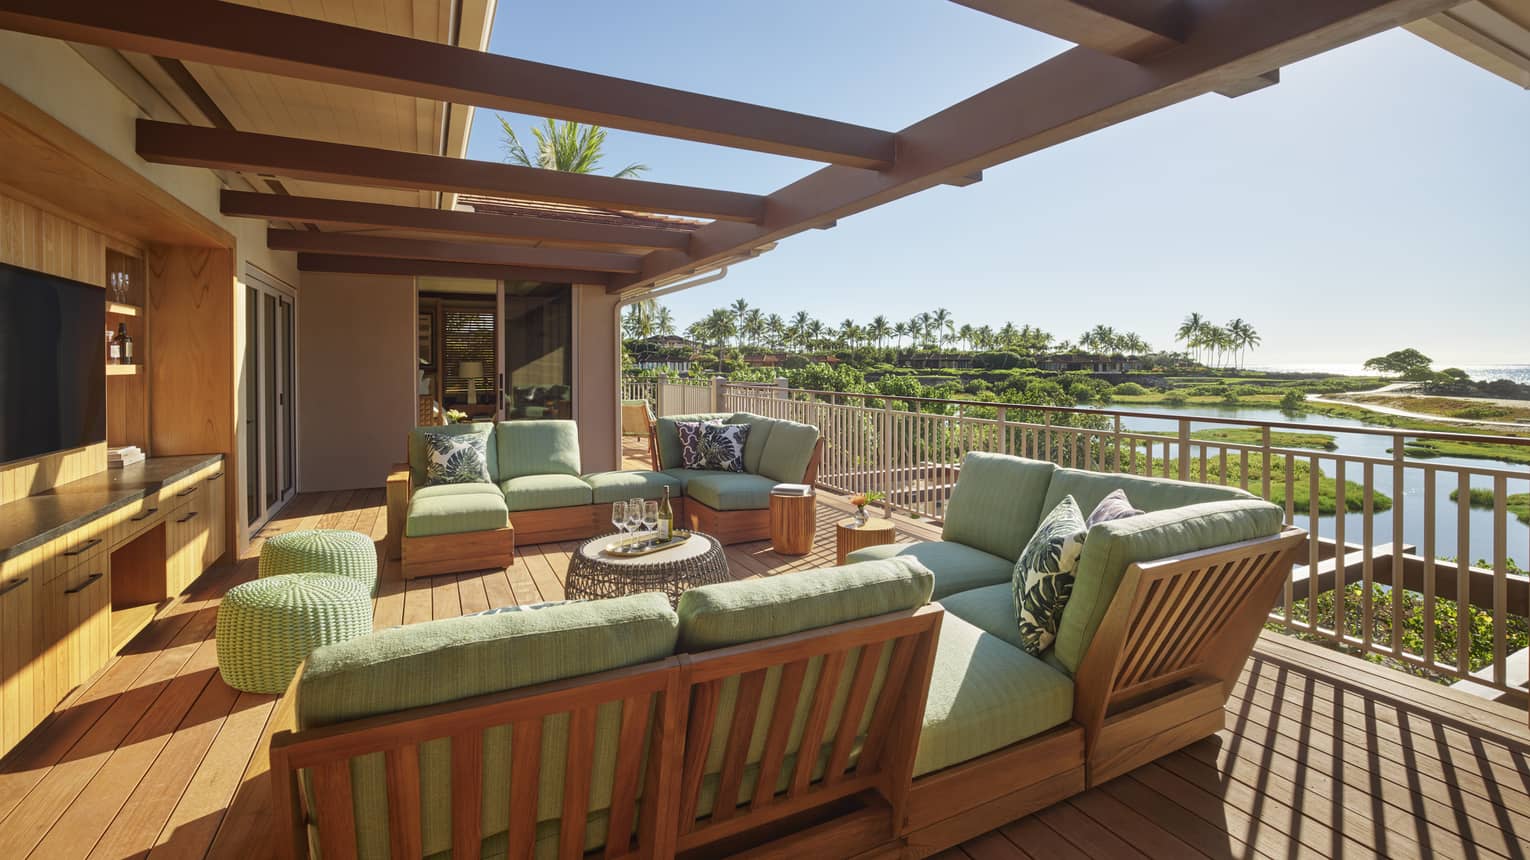 Private wooden deck, lounge sofas with green cushions, tropical view